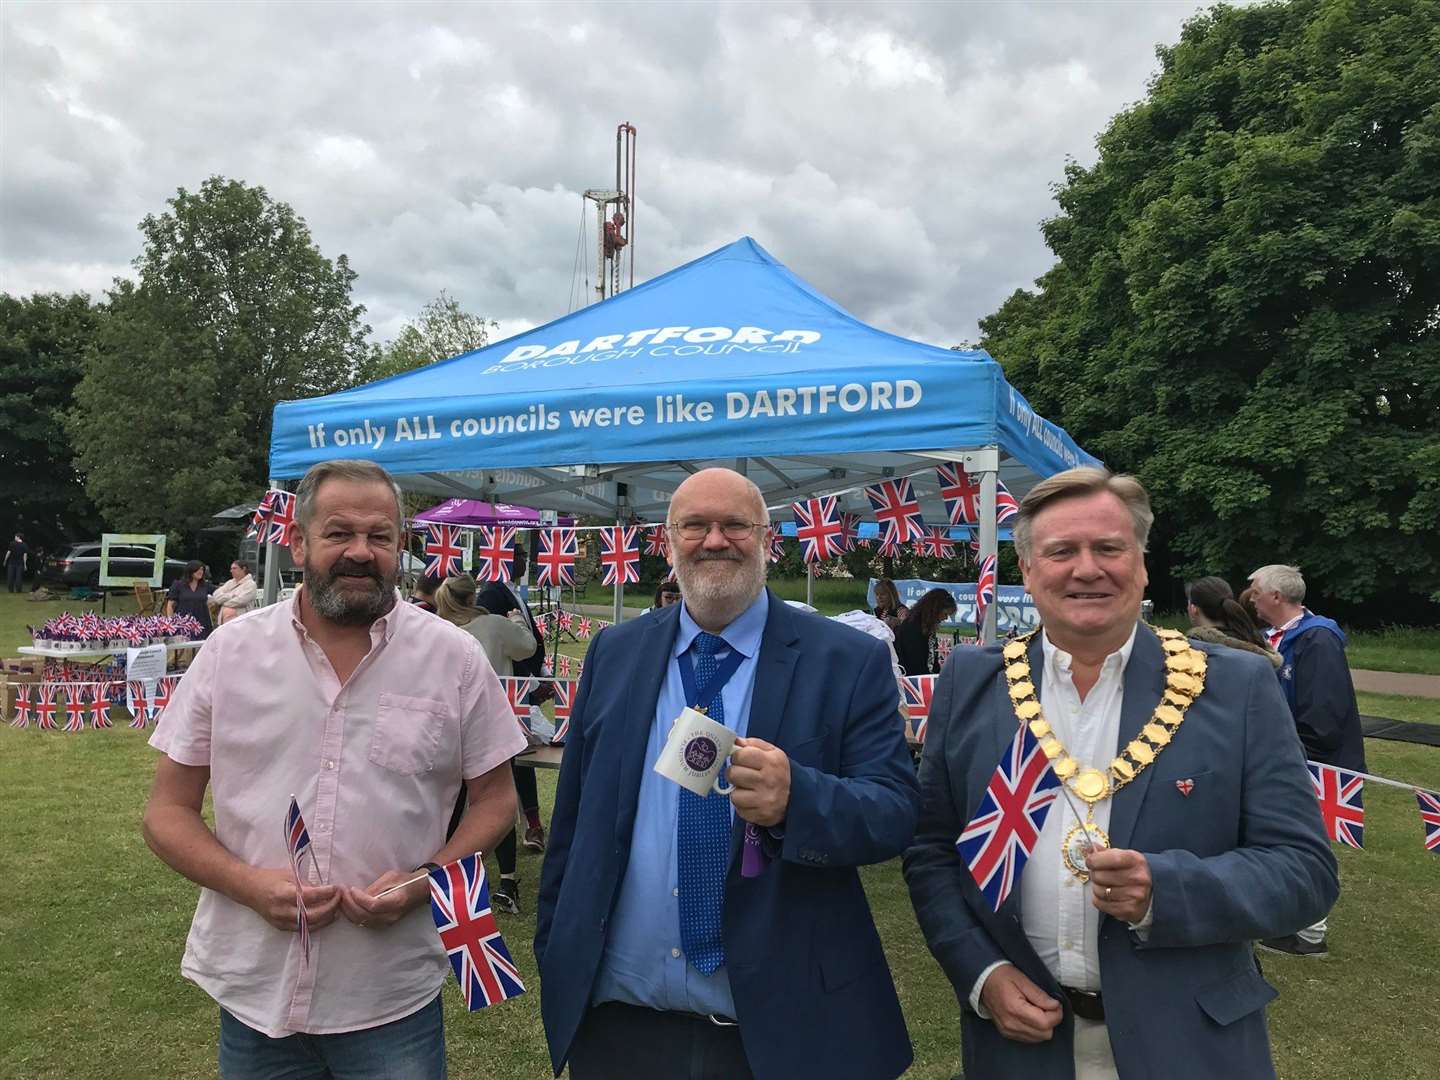 The Great Big Platinum Jubilee Party on Sunday marked the start of celebrations in Dartford